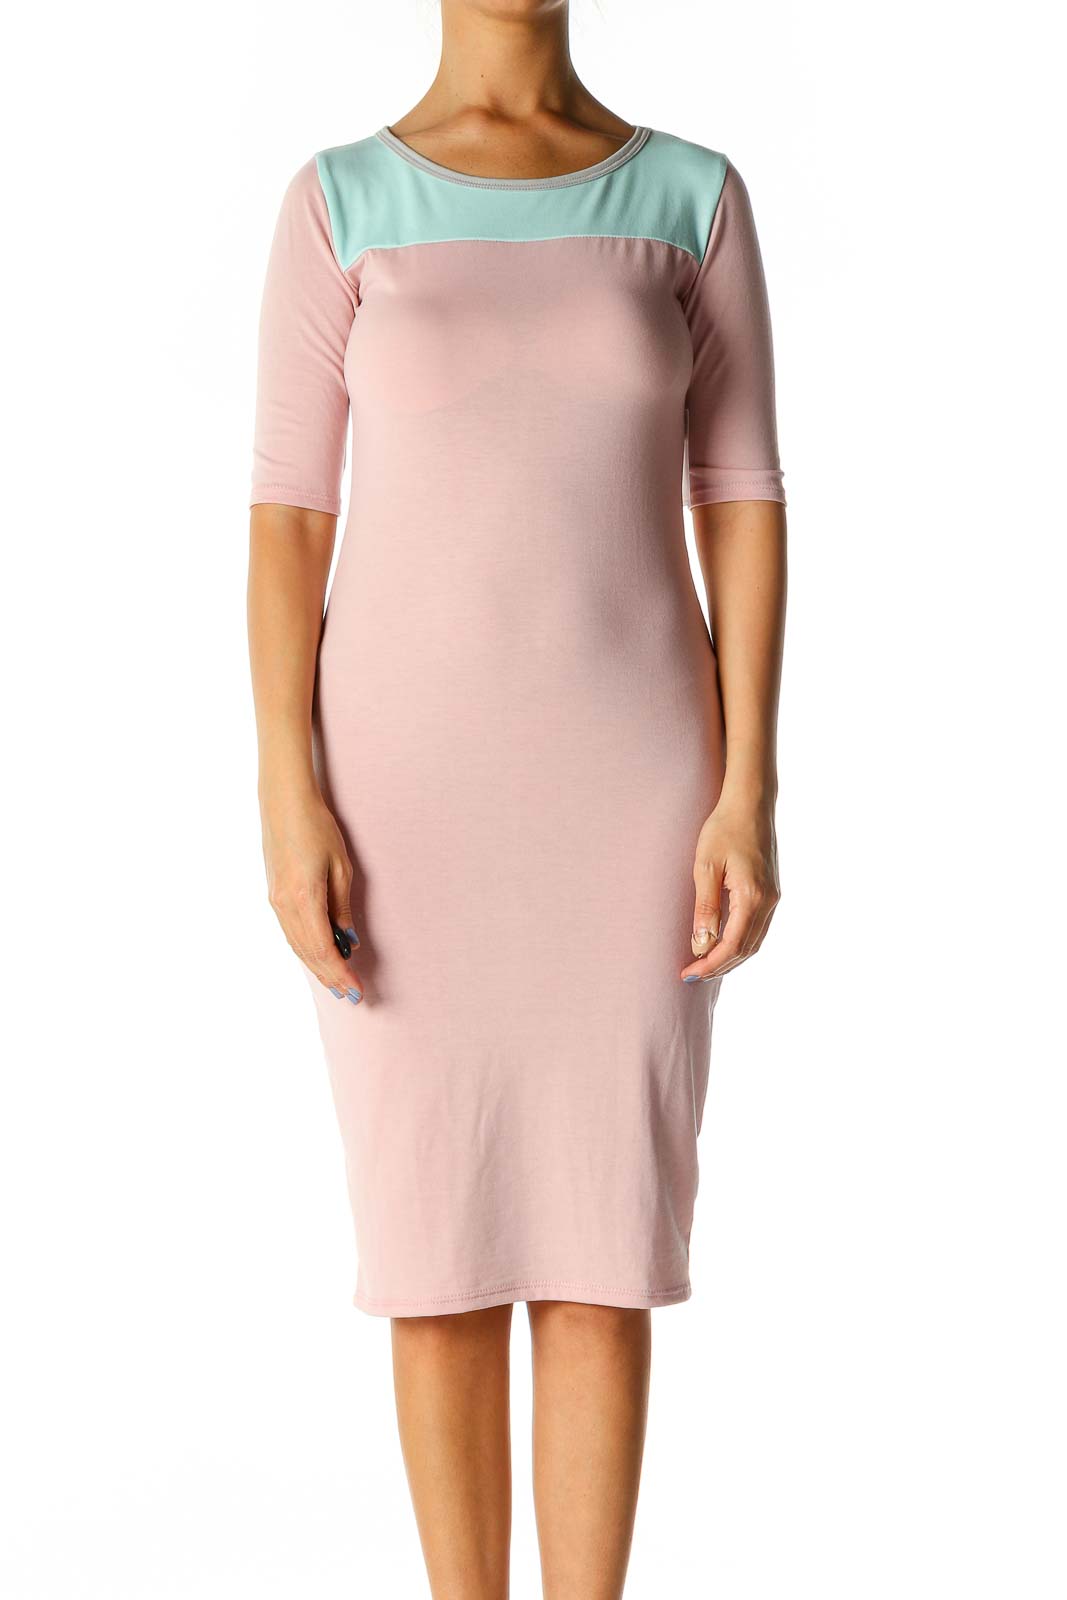 Pink Colorblock Chic Sheath Dress Front